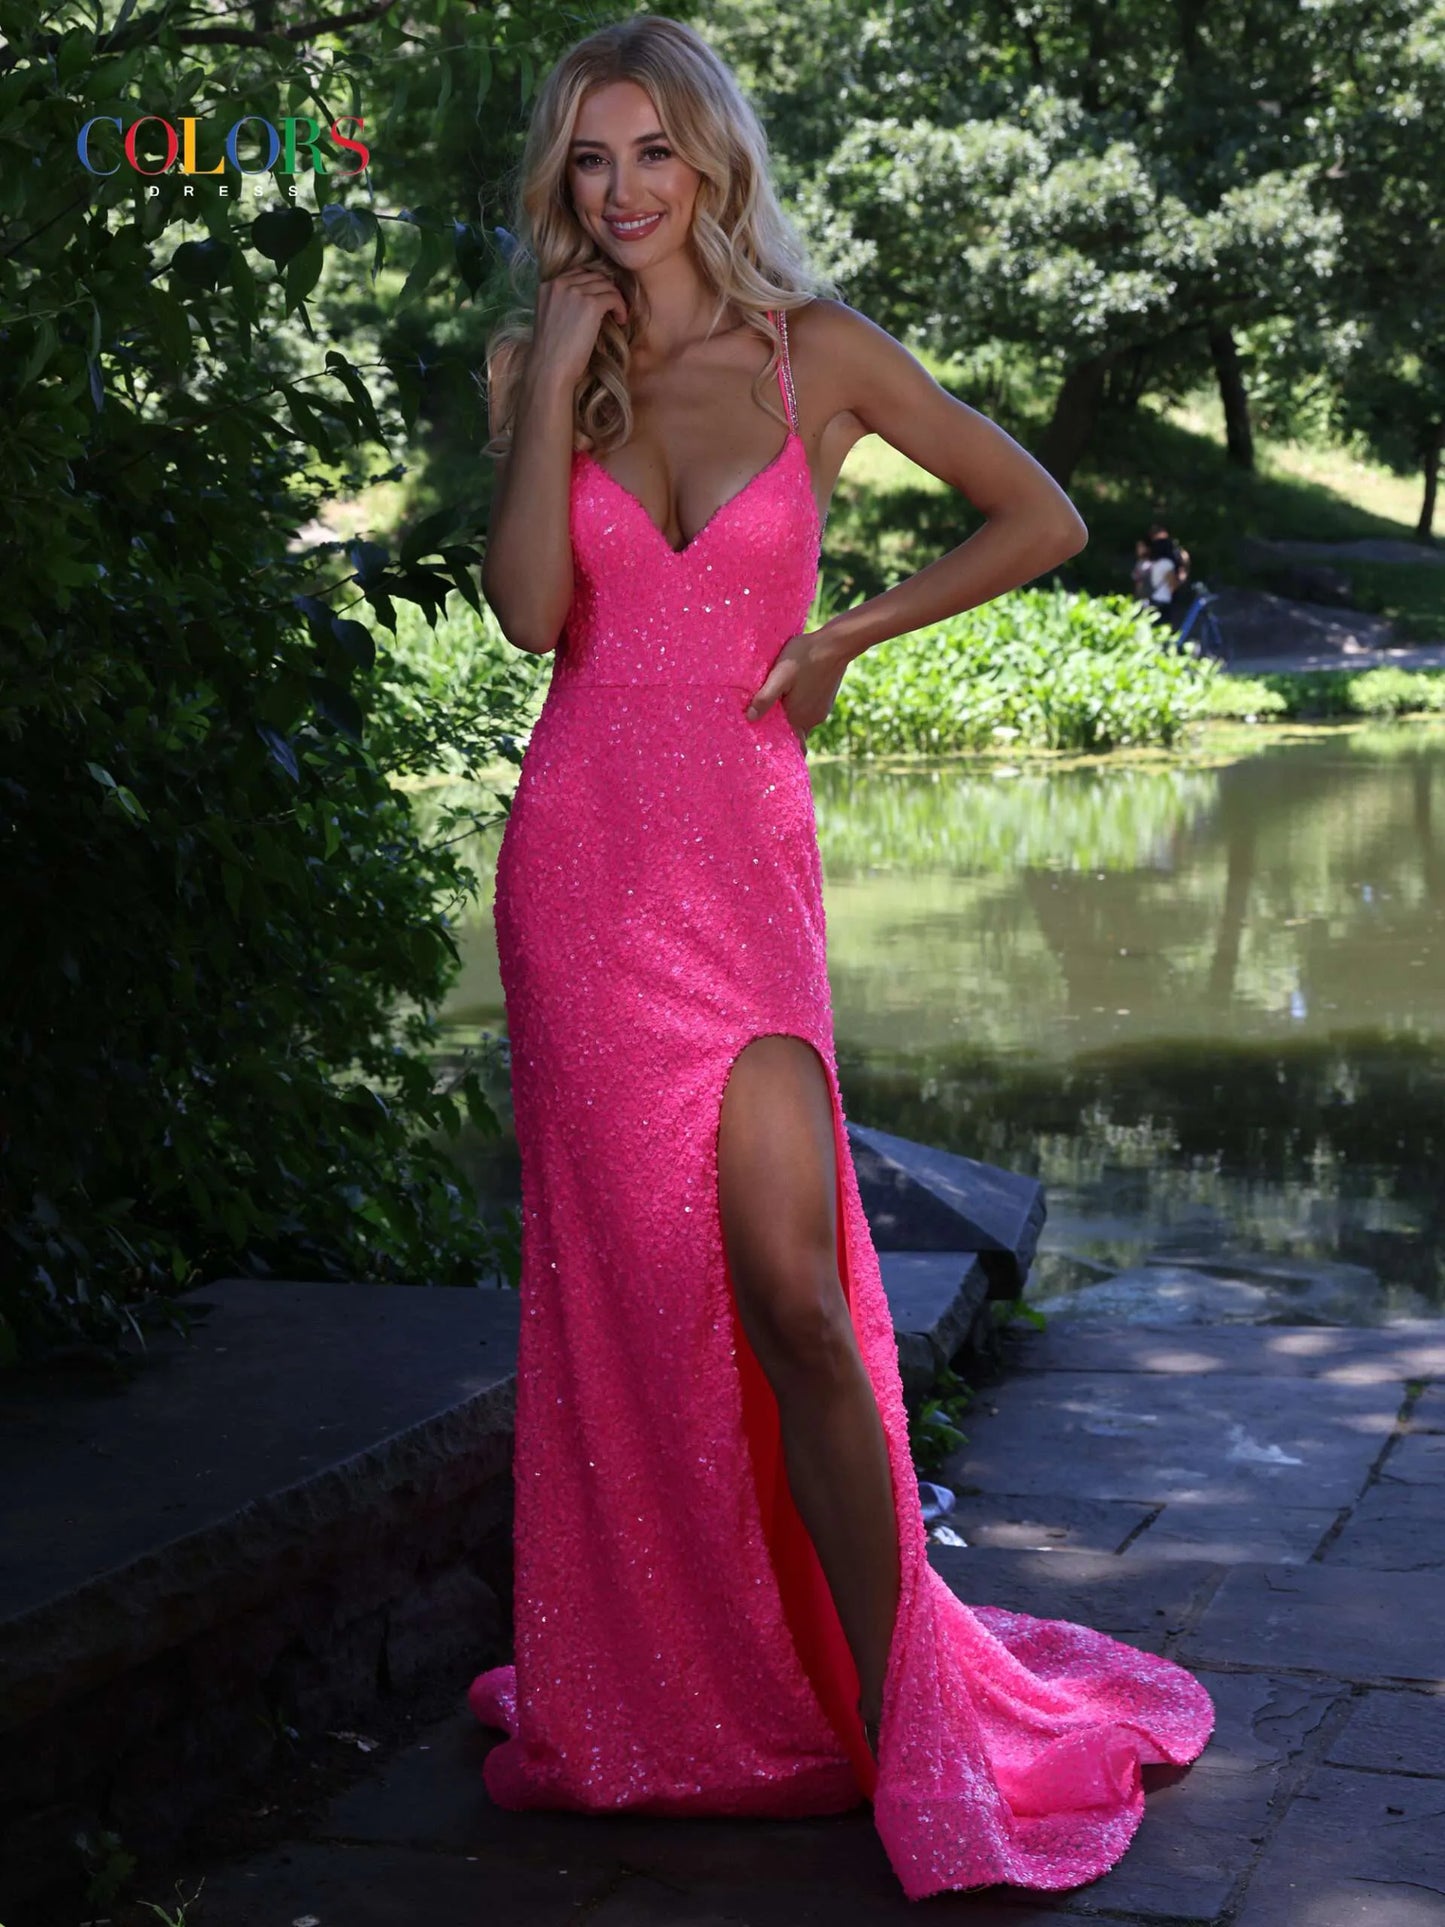 This Colors Dress 2975 long prom dress showcases a fitted design, accented with sparkling sequins and thin spaghetti straps. The dress features a high slit, offering a glamorous touch to your formal pageant look. Stand out from the crowd with this elegant and eye-catching gown.